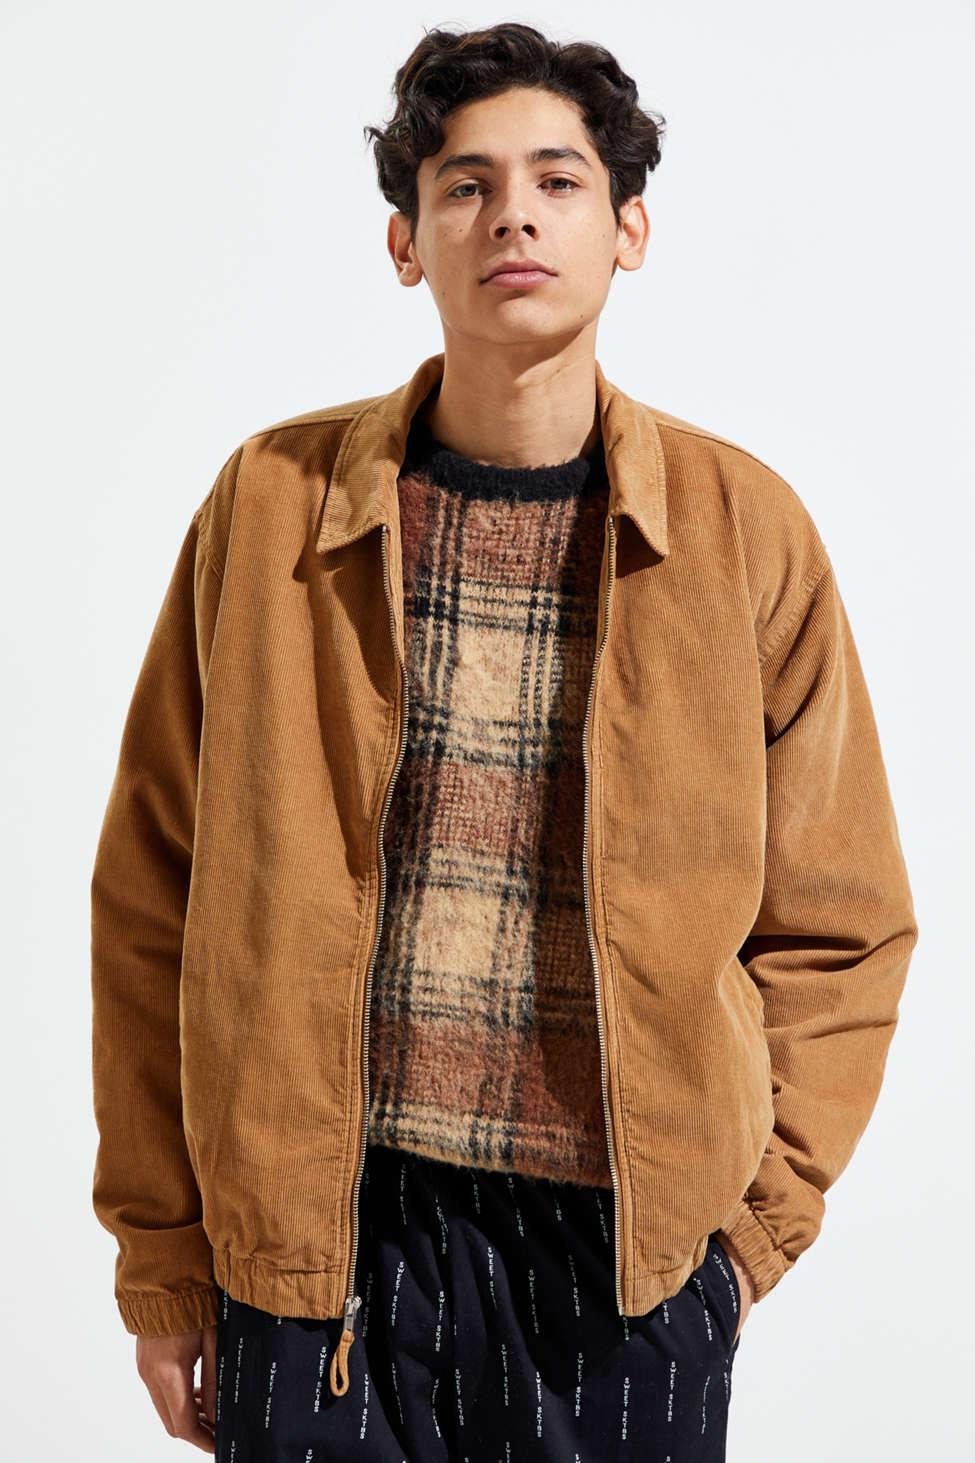 Urban Outfitters Uo Corduroy Harrington Jacket in Brown for Men - Lyst